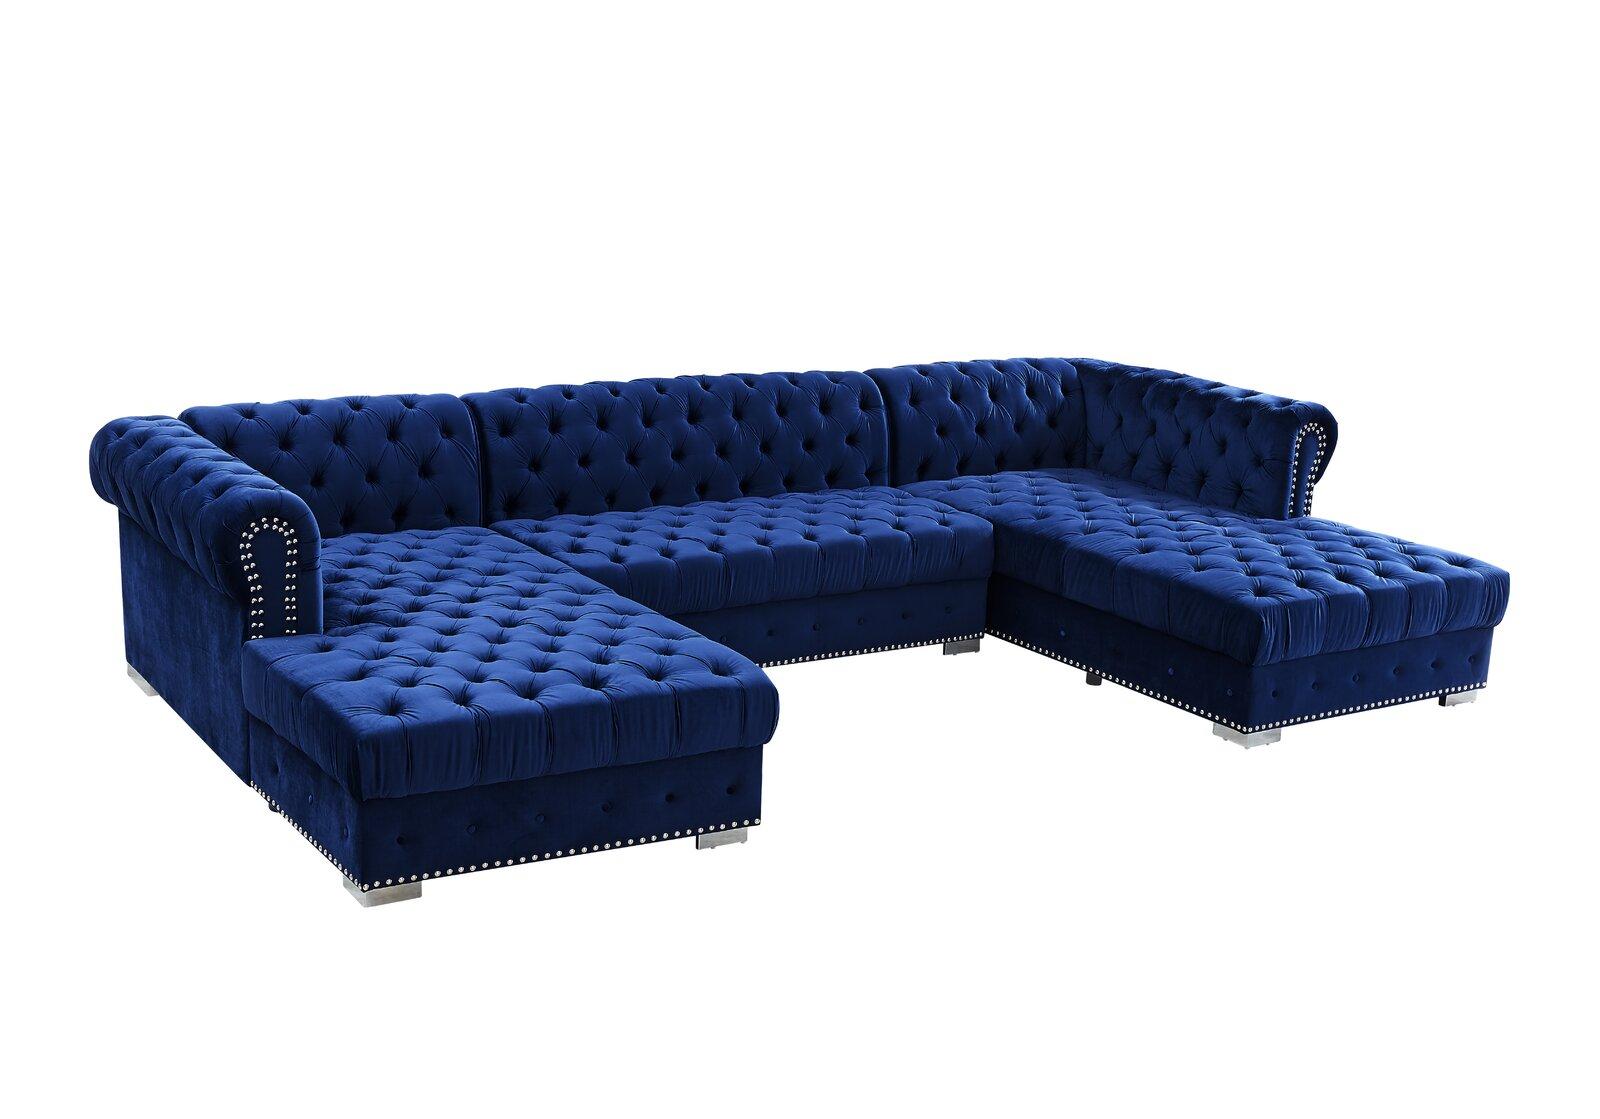 Contemporary, Modern Sectional Sofa MONALISA GHF-808857679628 in Blue Fabric